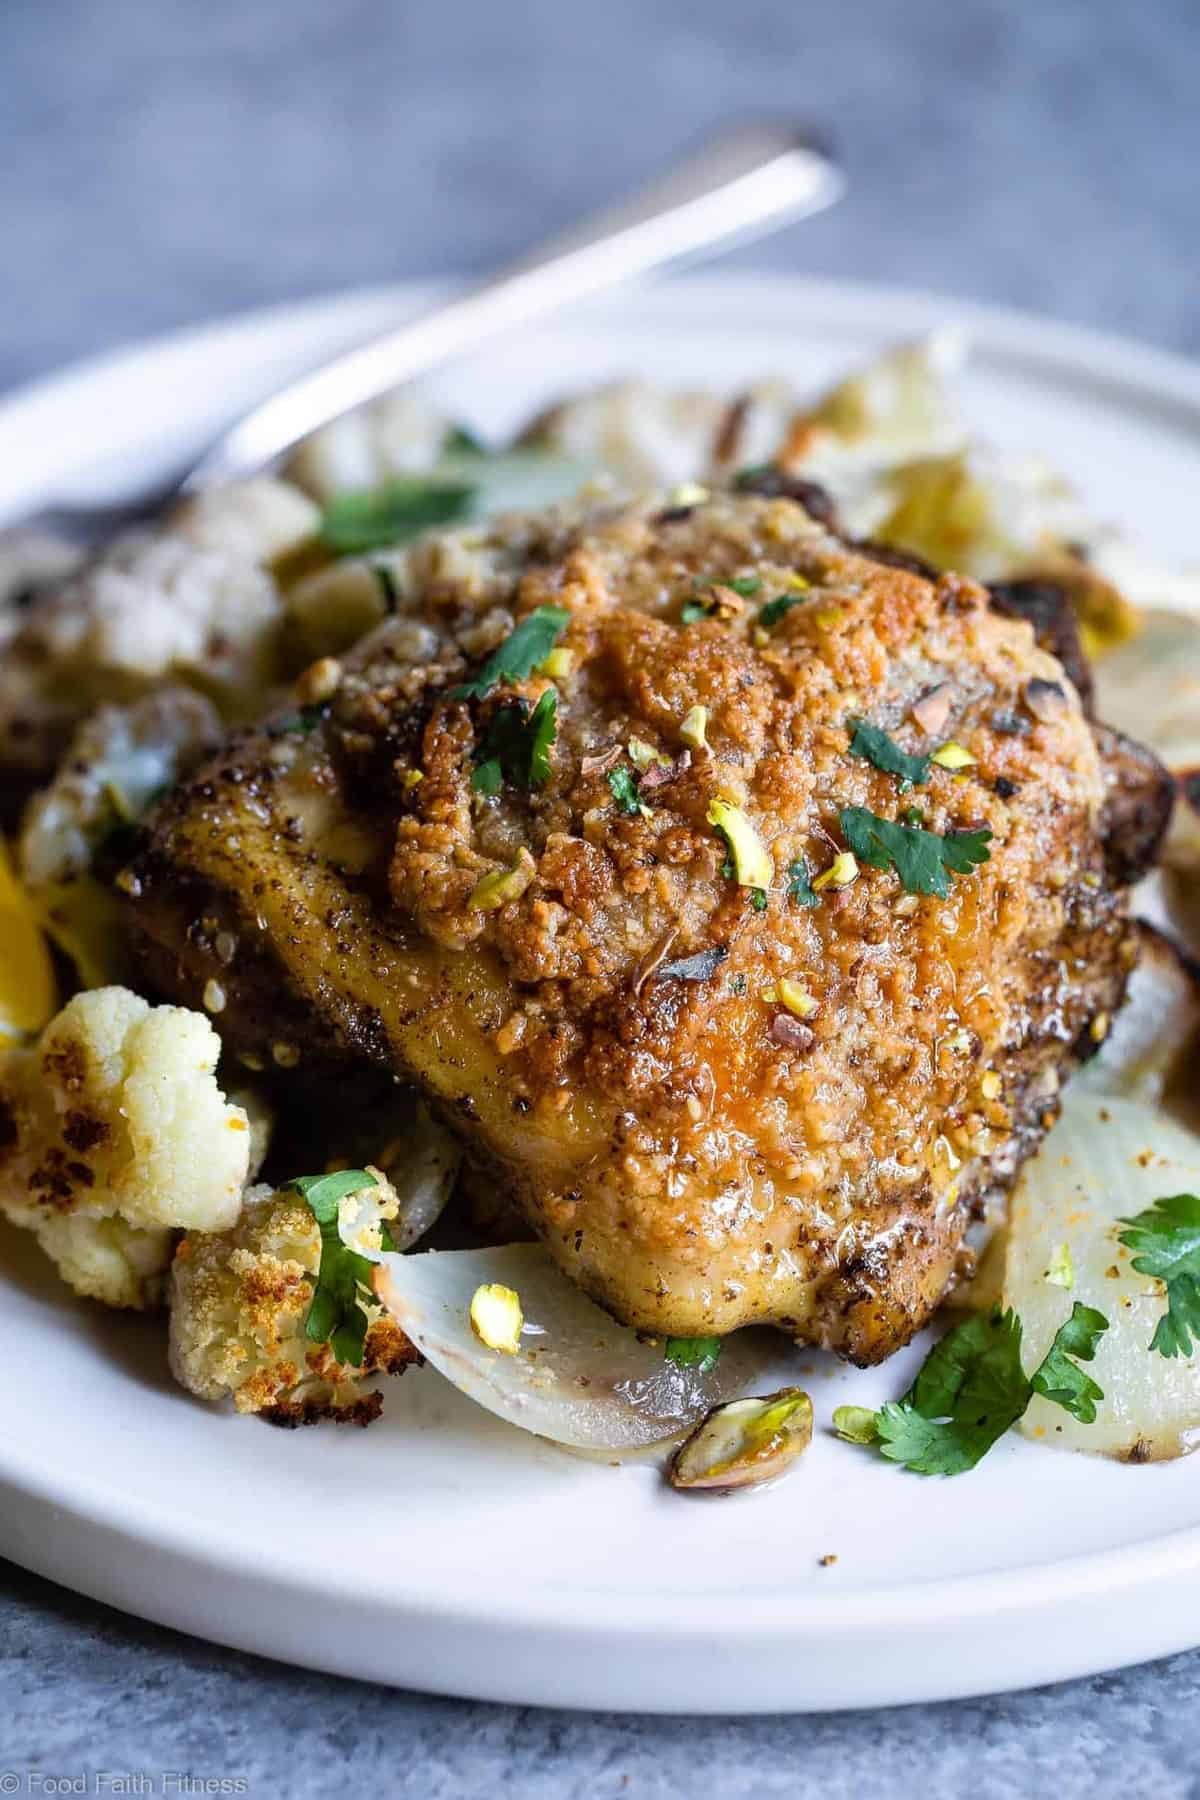 Sheet Pan Paleo Za'atar Chicken Thighs - an easy, one-pan, low carb healthy dinner with big, bold Middle Eastern flavors! The perfect keto friendly dish for meal prep or busy weeknights and you'll learn the secrets to crispy chicken thighs! | #Foodfaithfitness | #Glutenfree #Paleo #Whole30 #Lowcarb #Keto